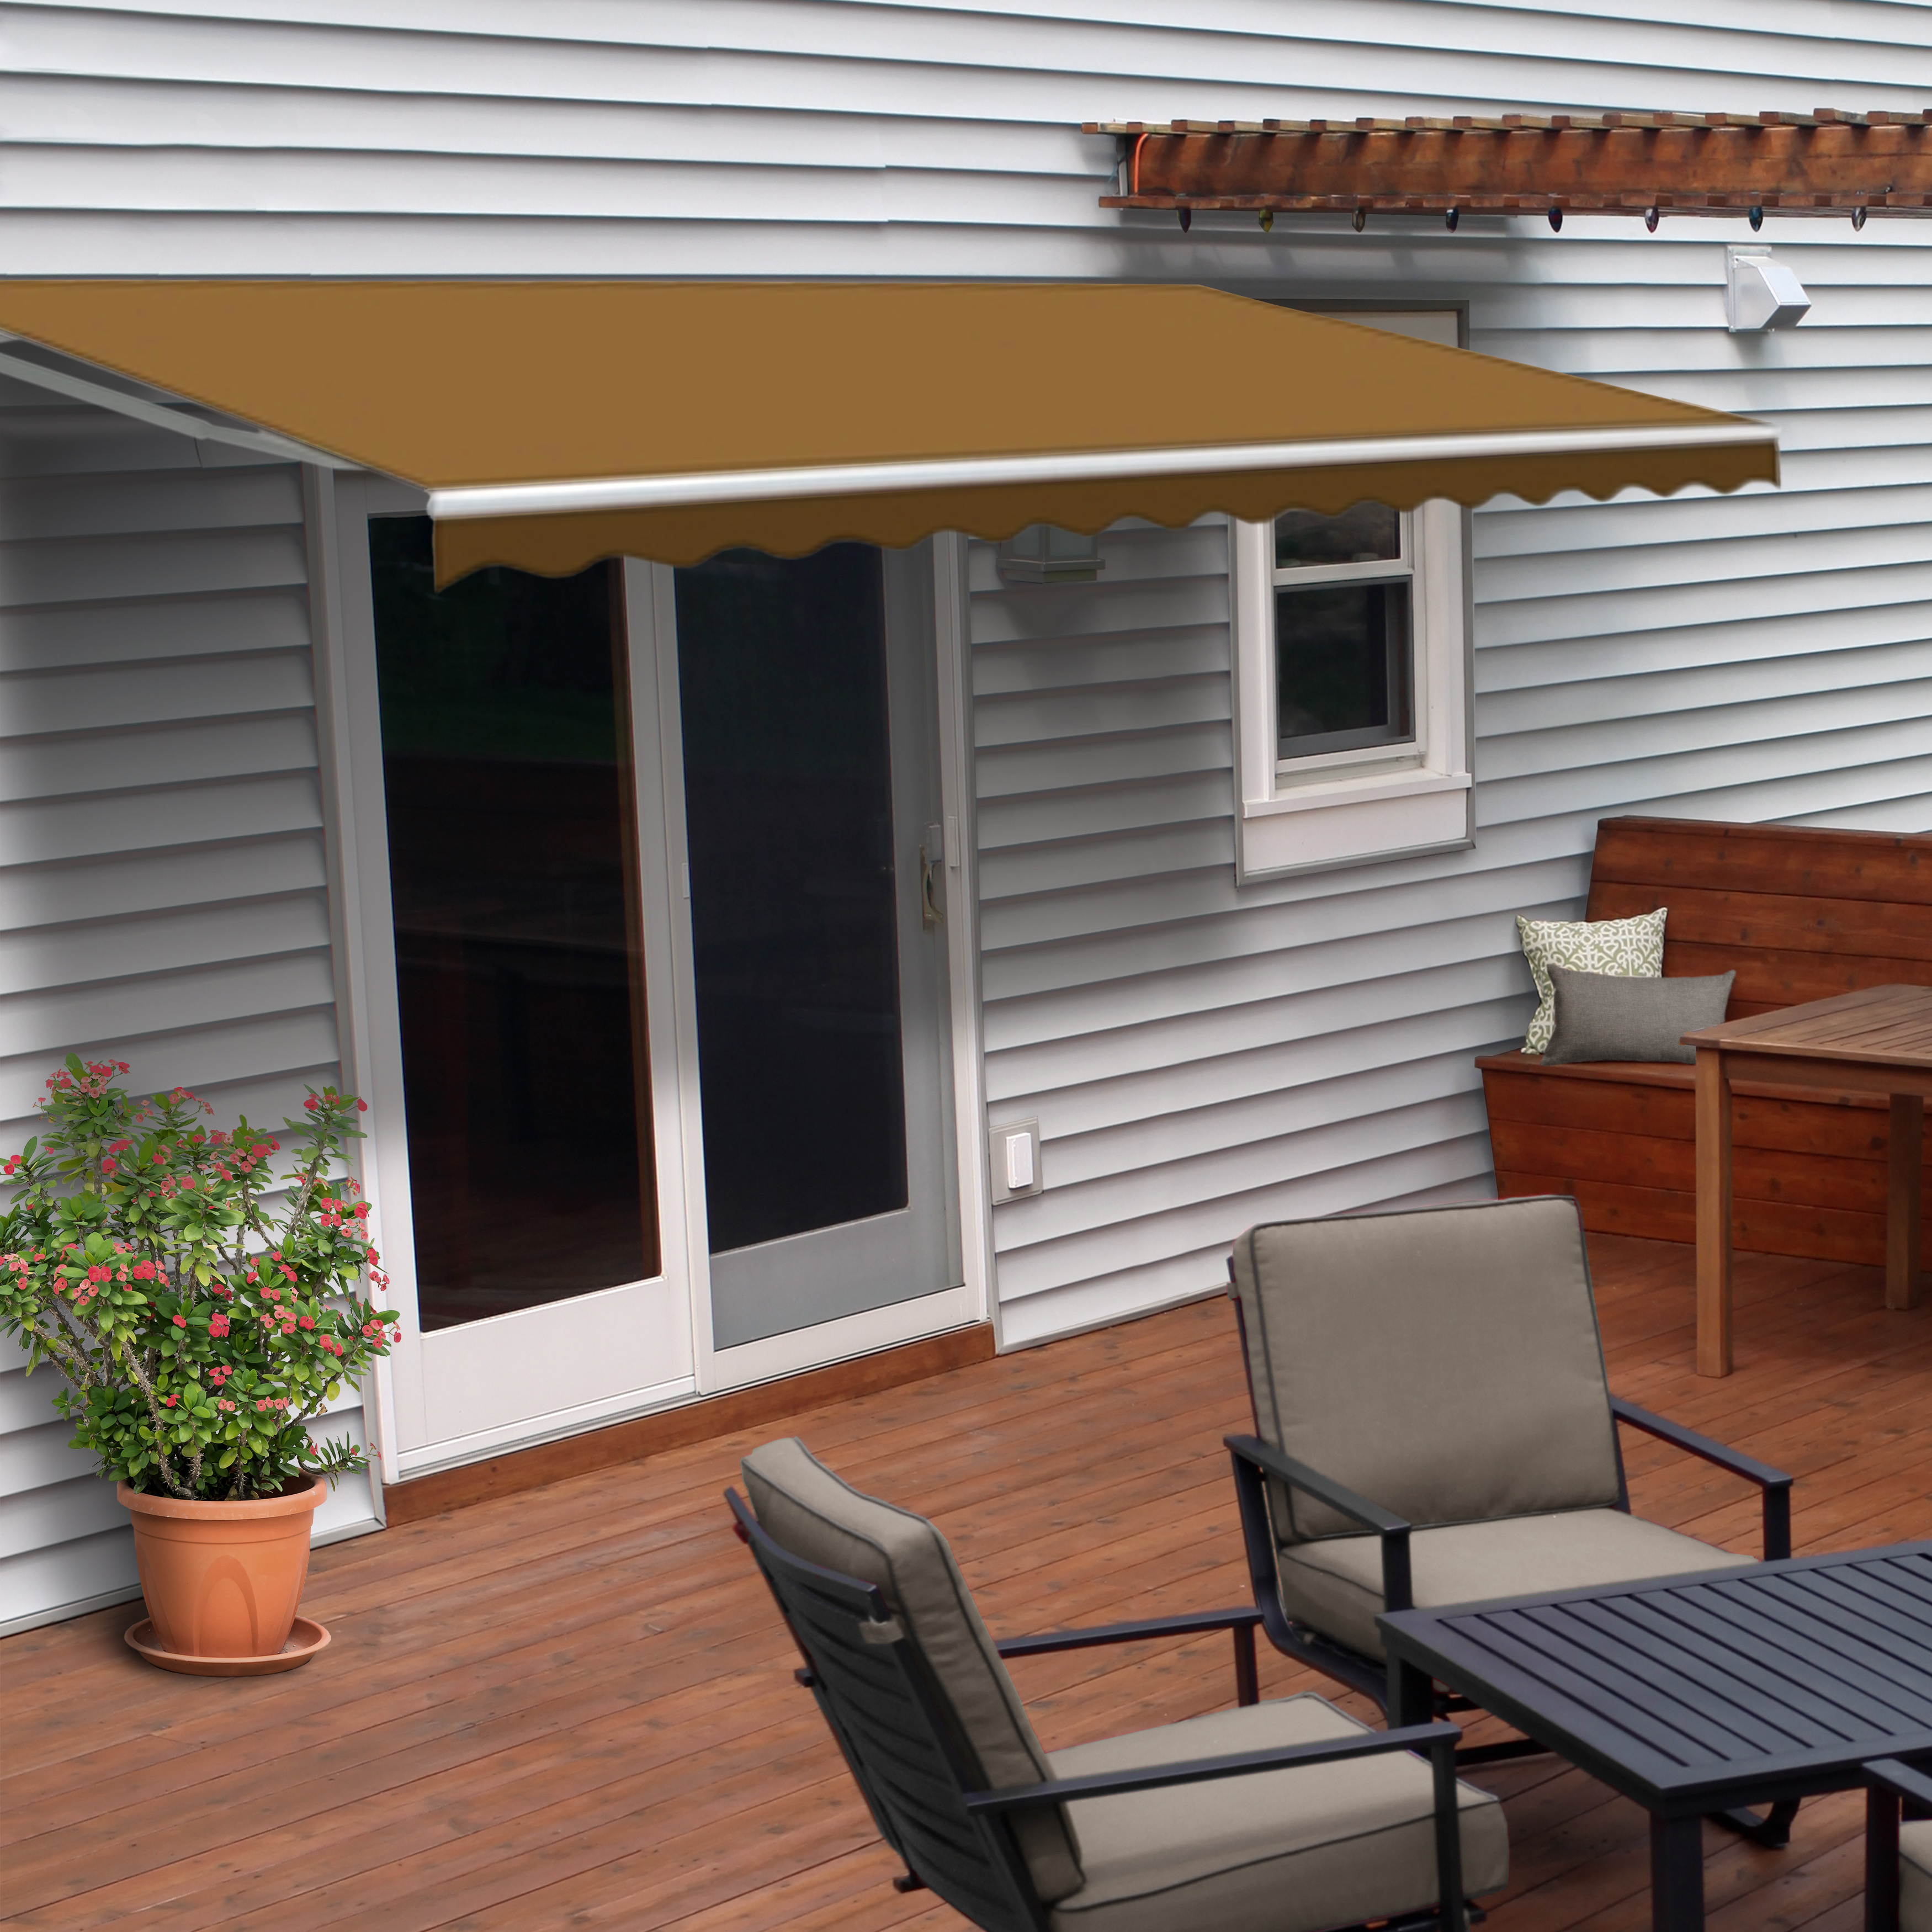 ALEKO 20' x 10' Retractable Motorized Patio Awning, Sand Color - image 1 of 14